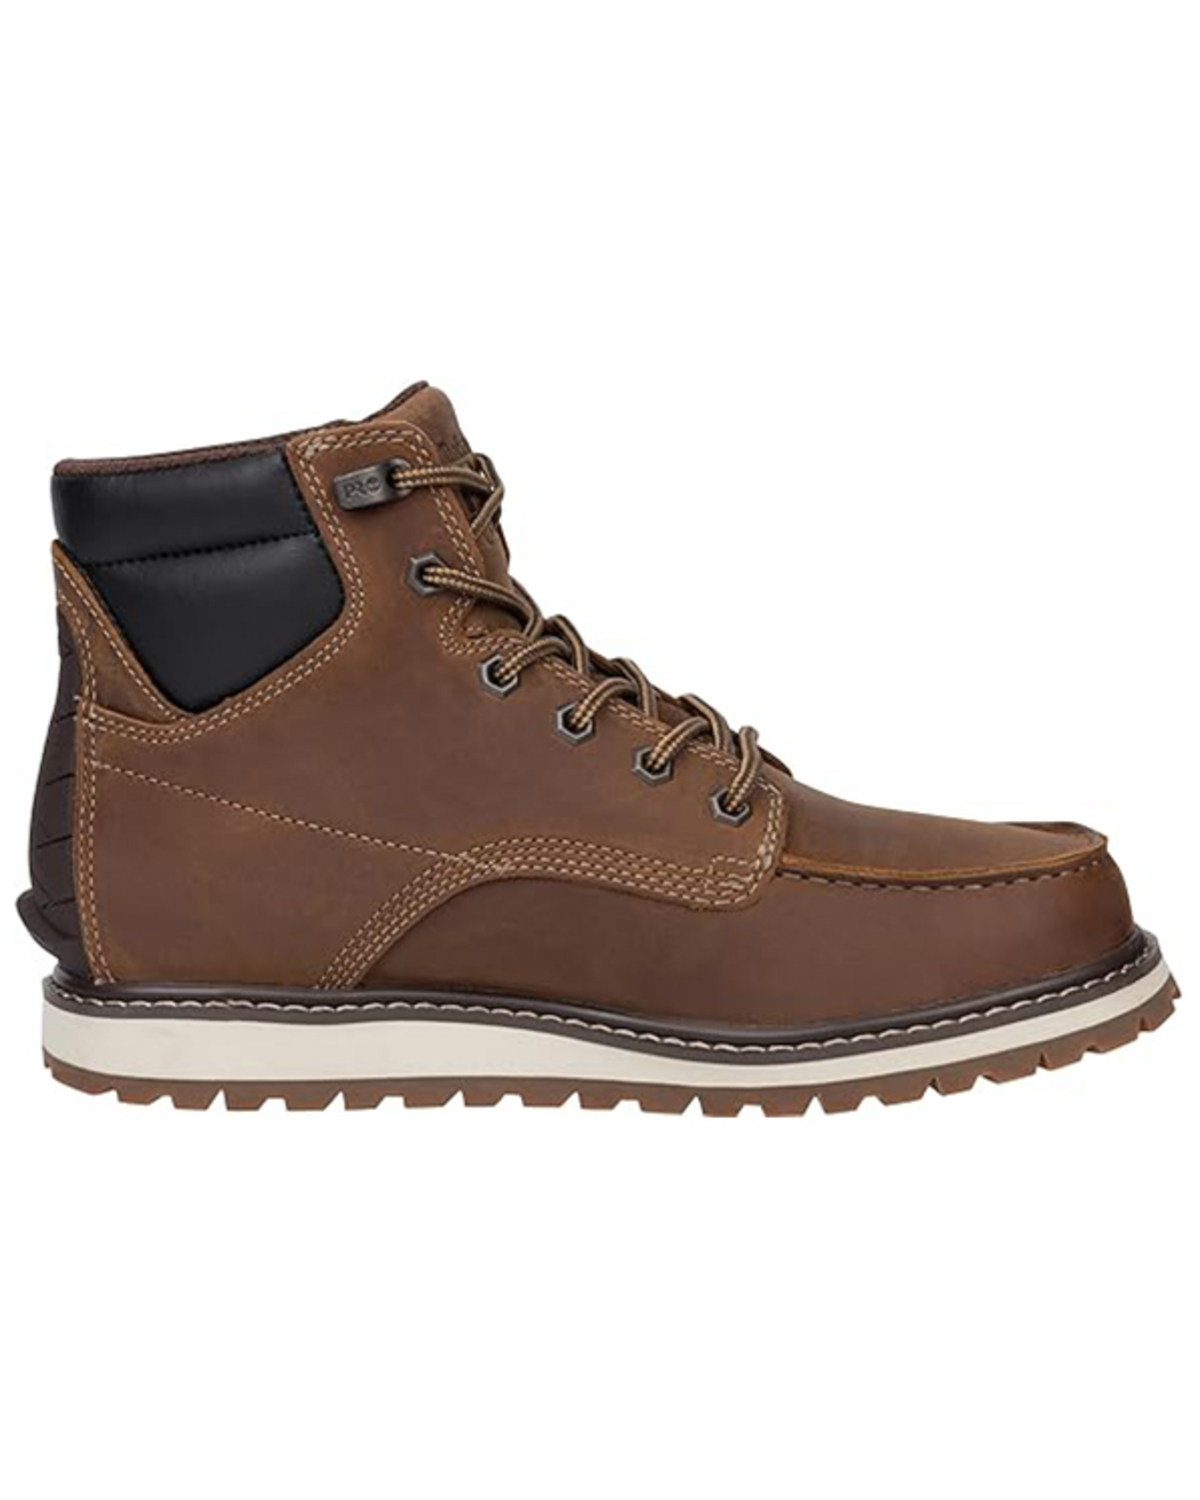 Timberland Men's 6" Irvine Lace-Up Work Boots - Soft Toe